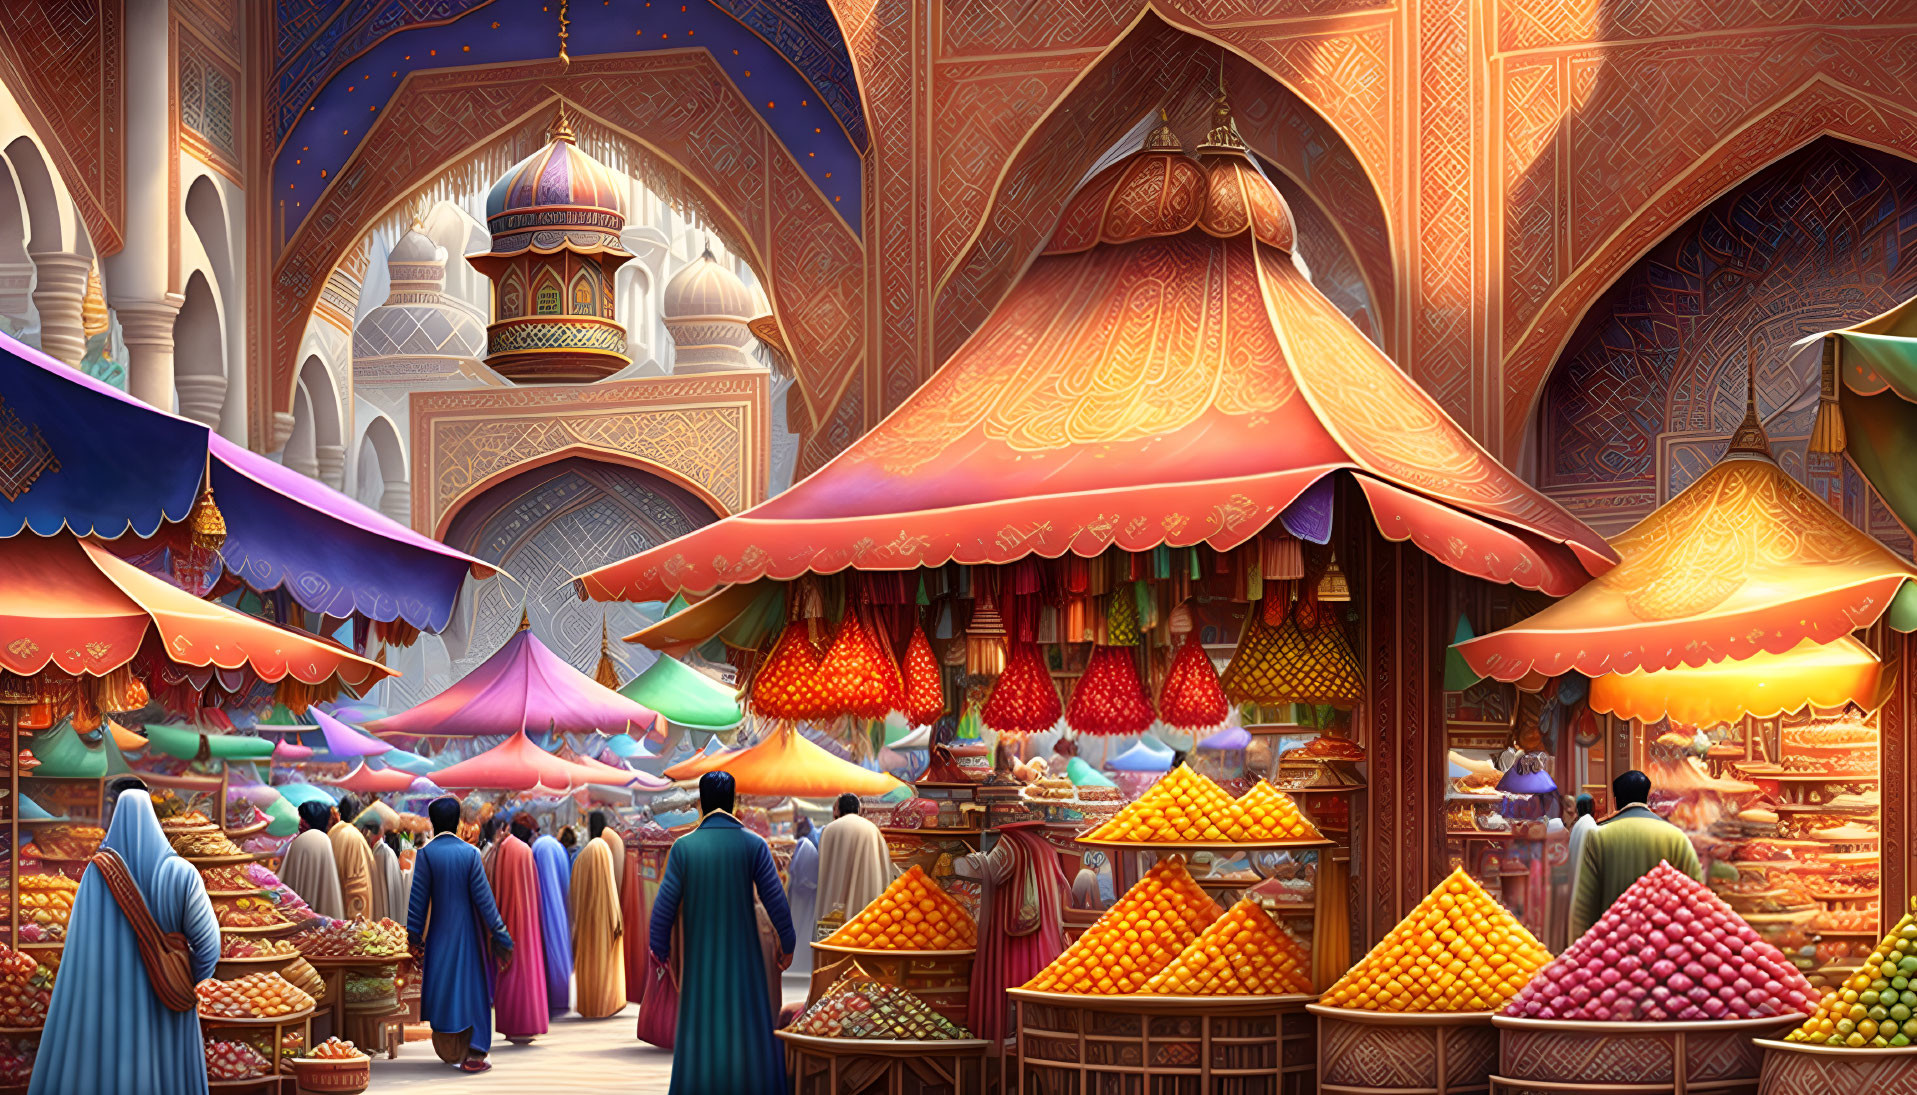 Vibrant Oriental market scene with colorful stalls and traditional attire